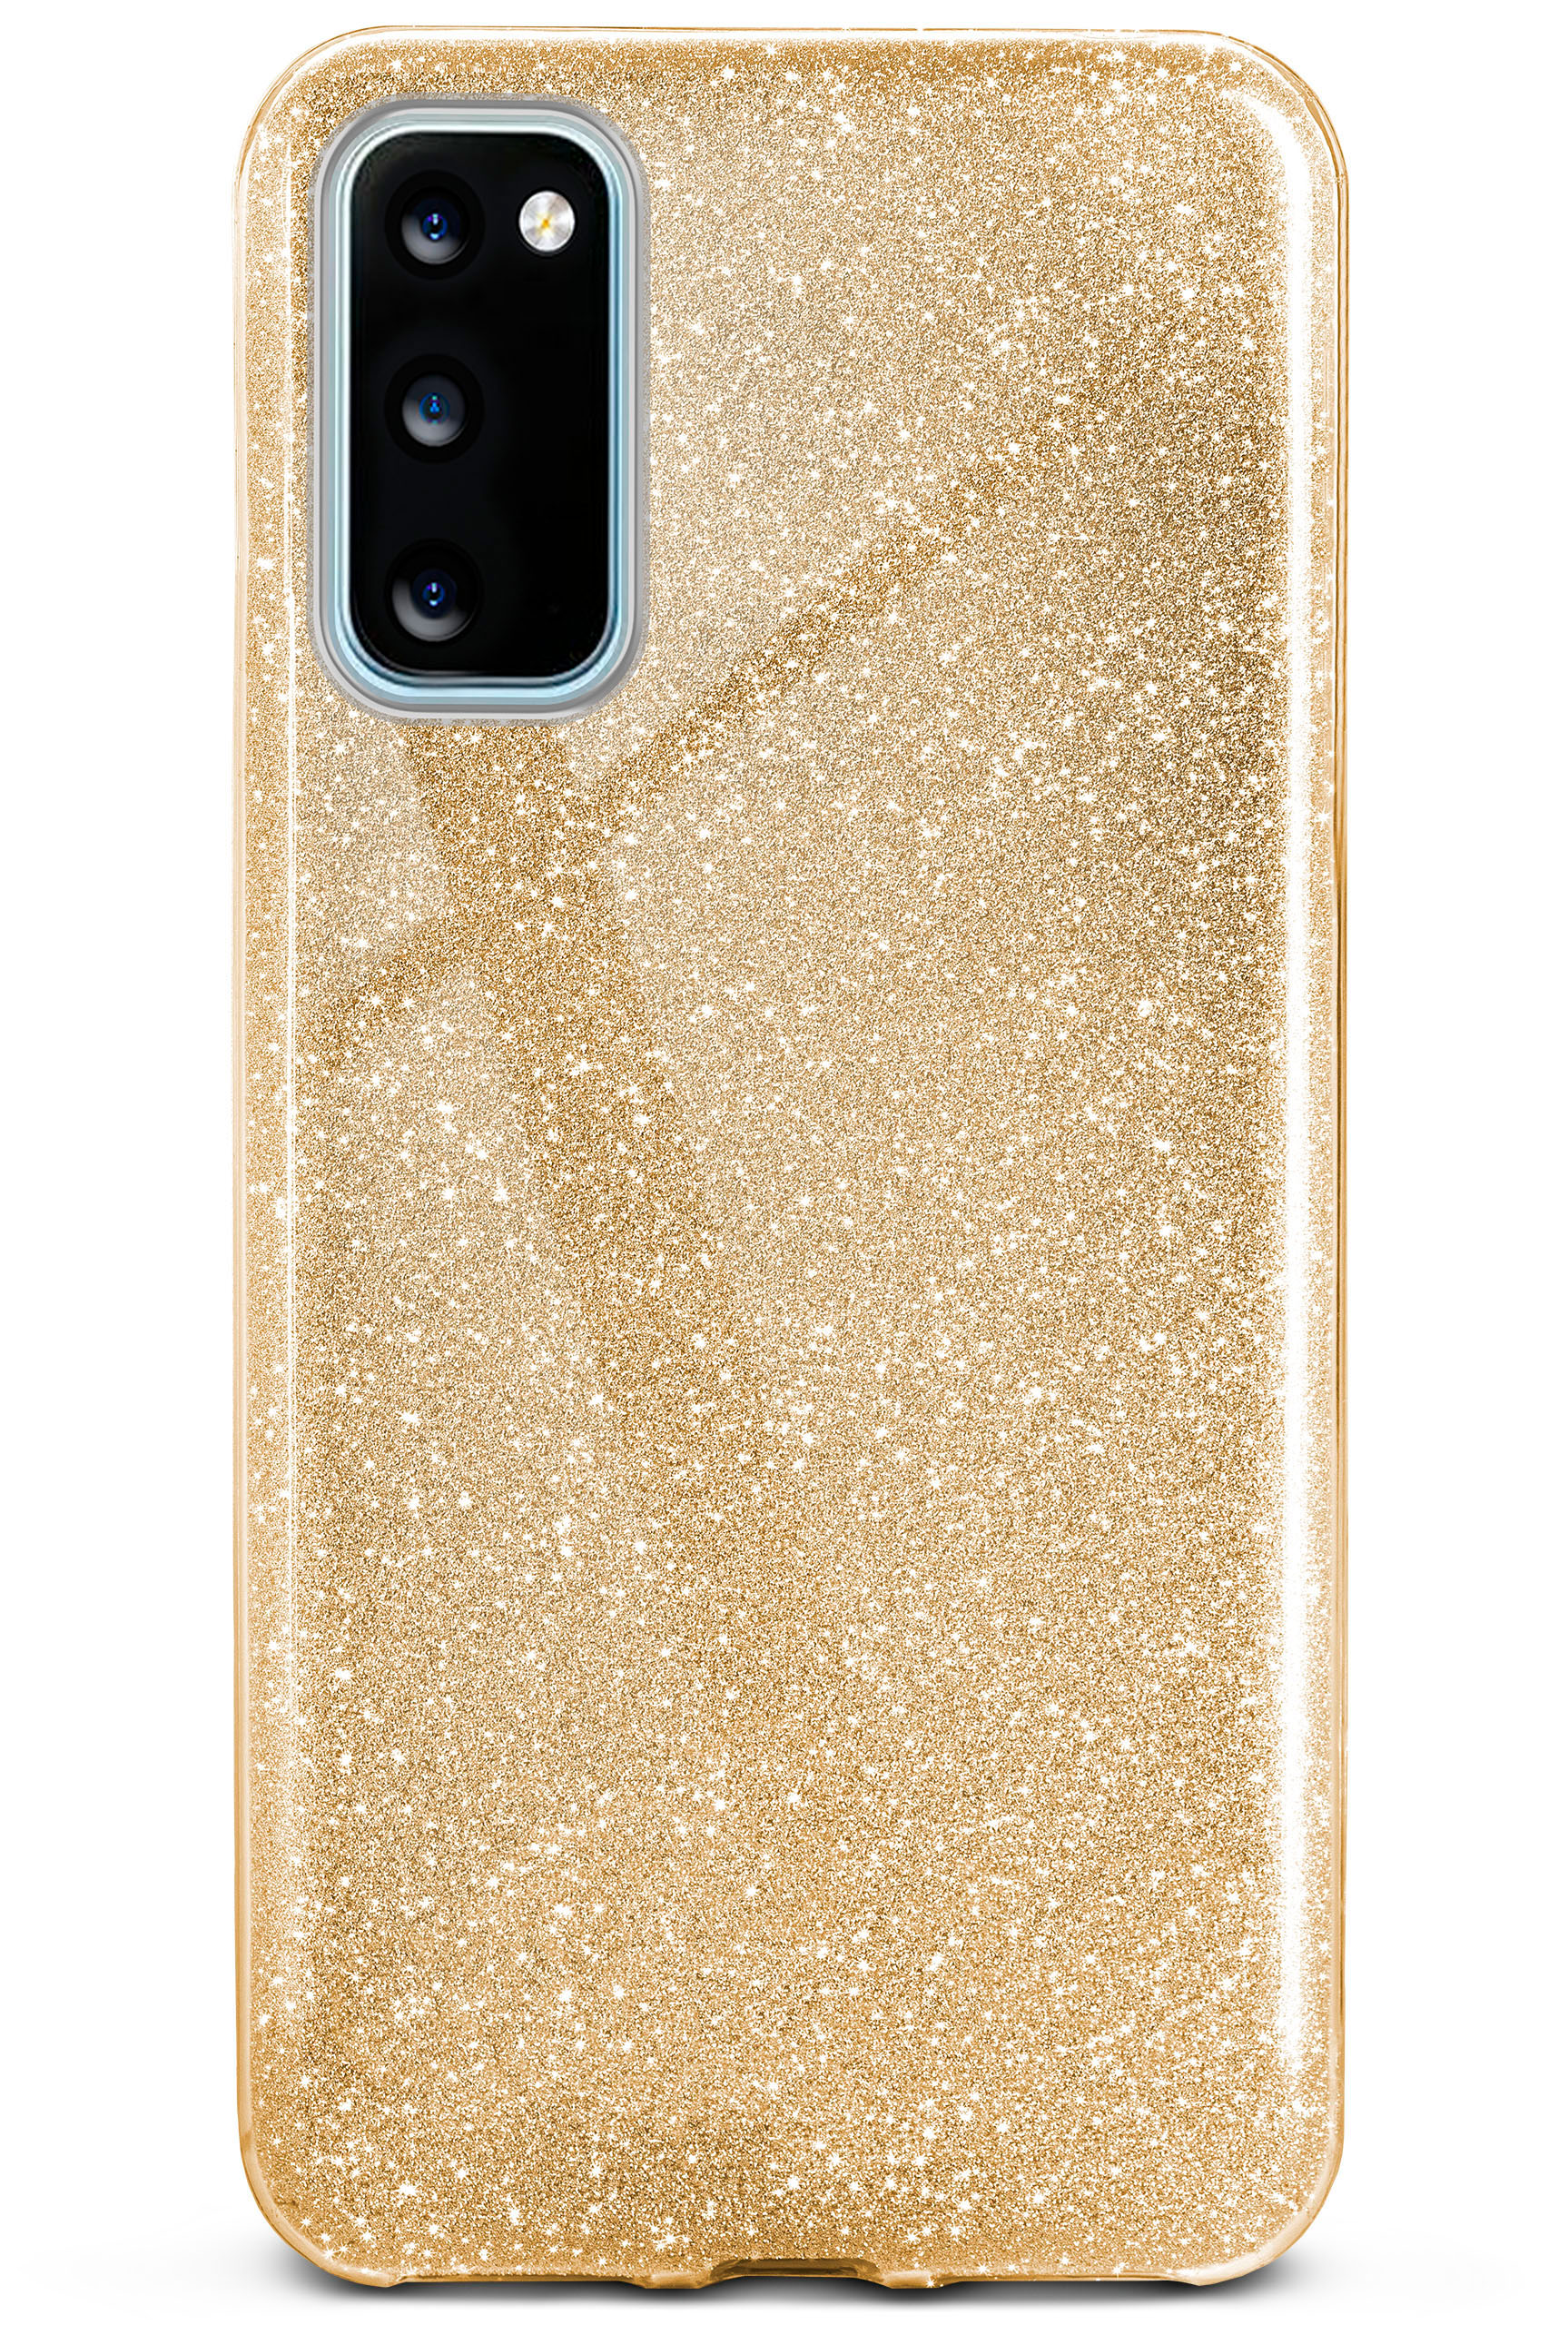 ONEFLOW Glitter Gold Case, S20 Shine Samsung, Galaxy - 5G, / Backcover, S20